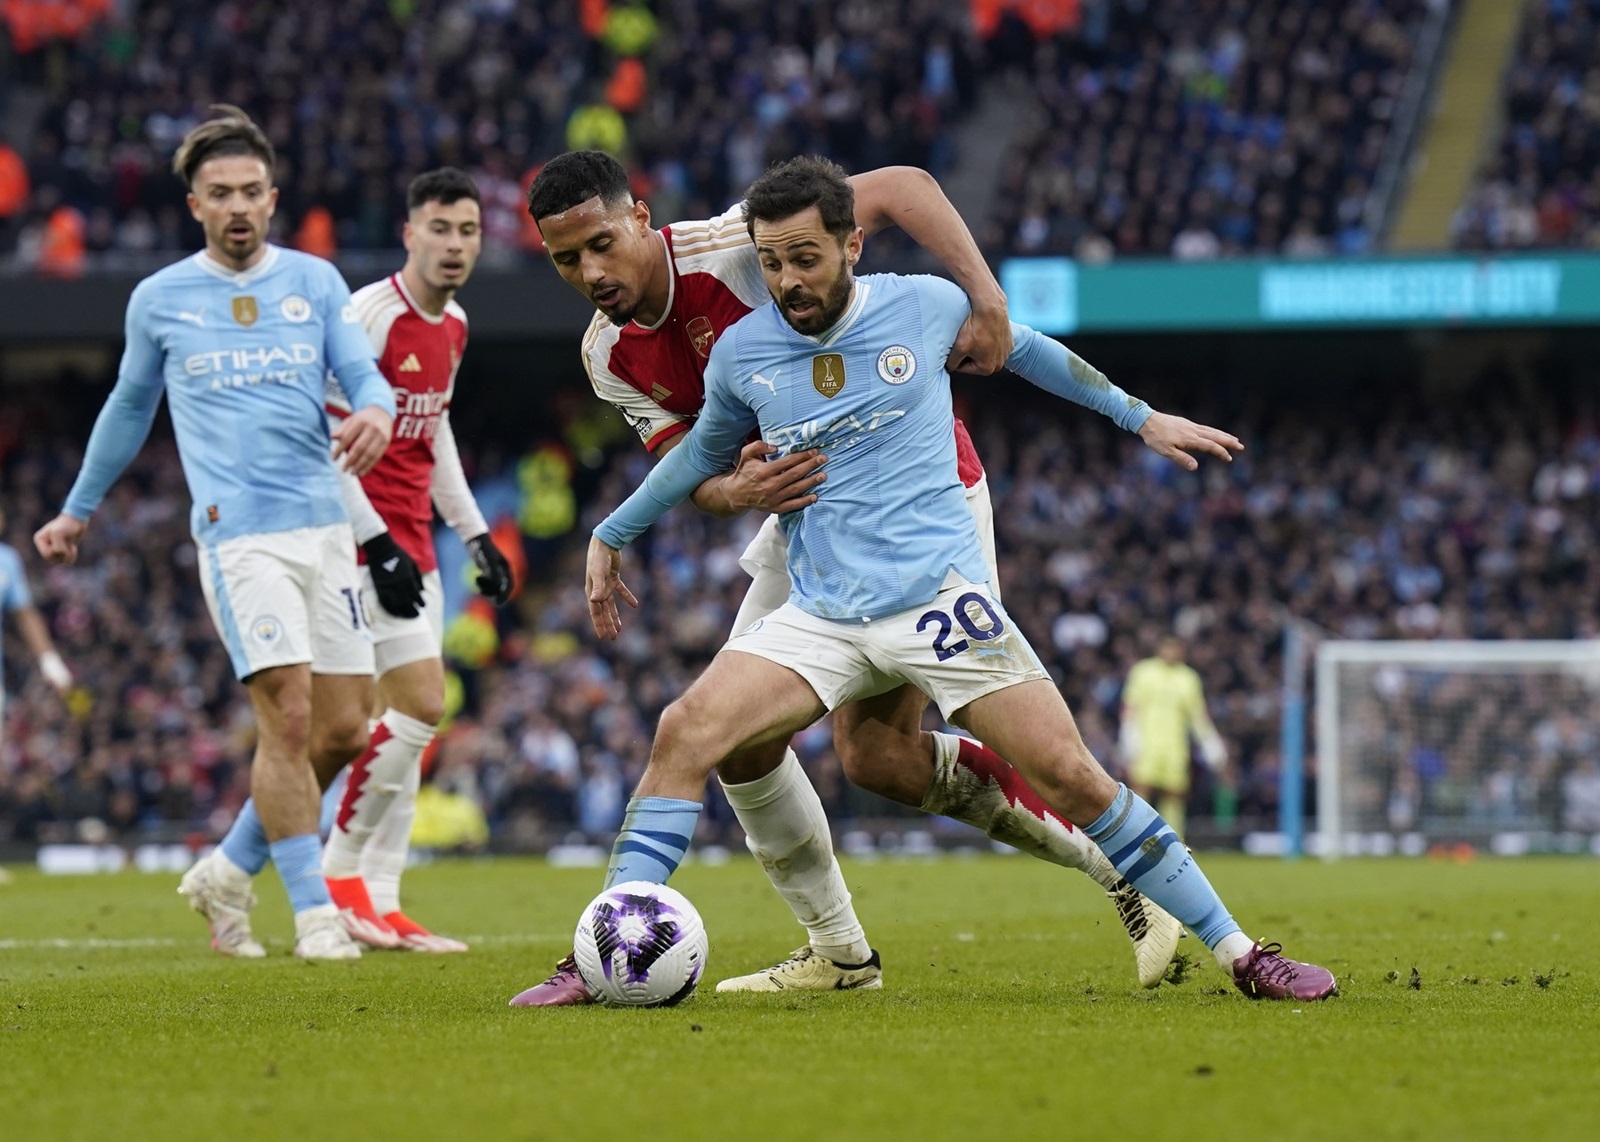 March 31, 2024, Manchester: Manchester, England, 31st March 2024. William Saliba of Arsenal grabs hold of Bernardo Silva of Manchester City during the Premier League match at the Etihad Stadium, Manchester.,Image: 861428033, License: Rights-managed, Restrictions: * United Kingdom Rights OUT *, Model Release: no, Credit line: Andrew Yates / Zuma Press / Profimedia